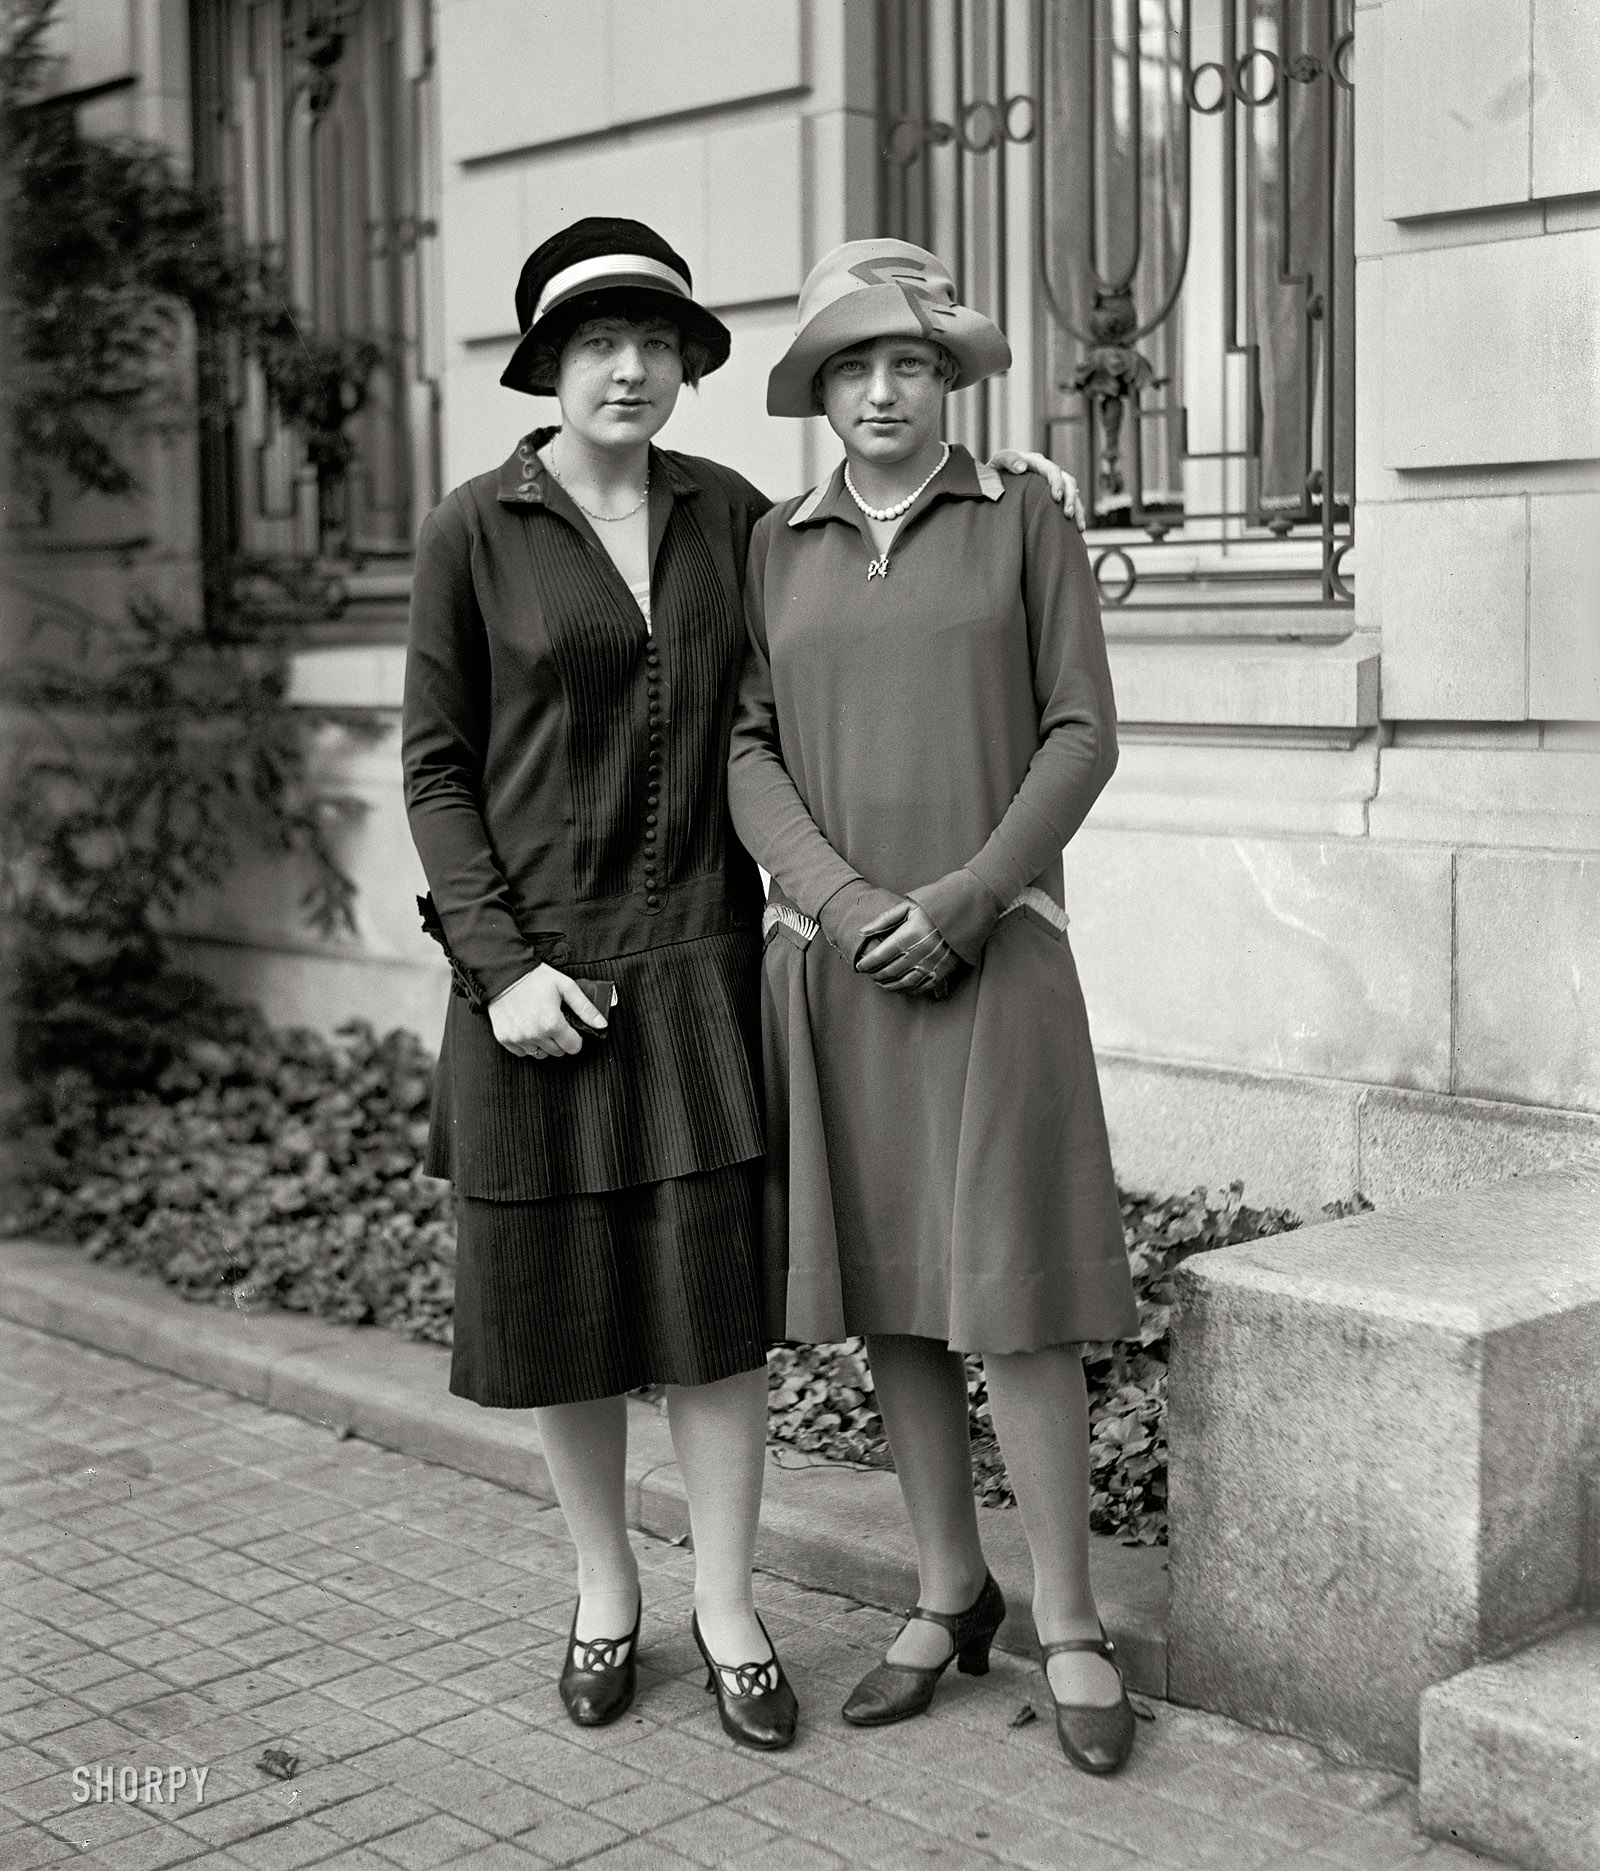 October 14, 1926. Washington, D.C. "Pauline and Ellis Bostrom." Daughters of the Swedish ambassador. National Photo Company glass negative. View full size.